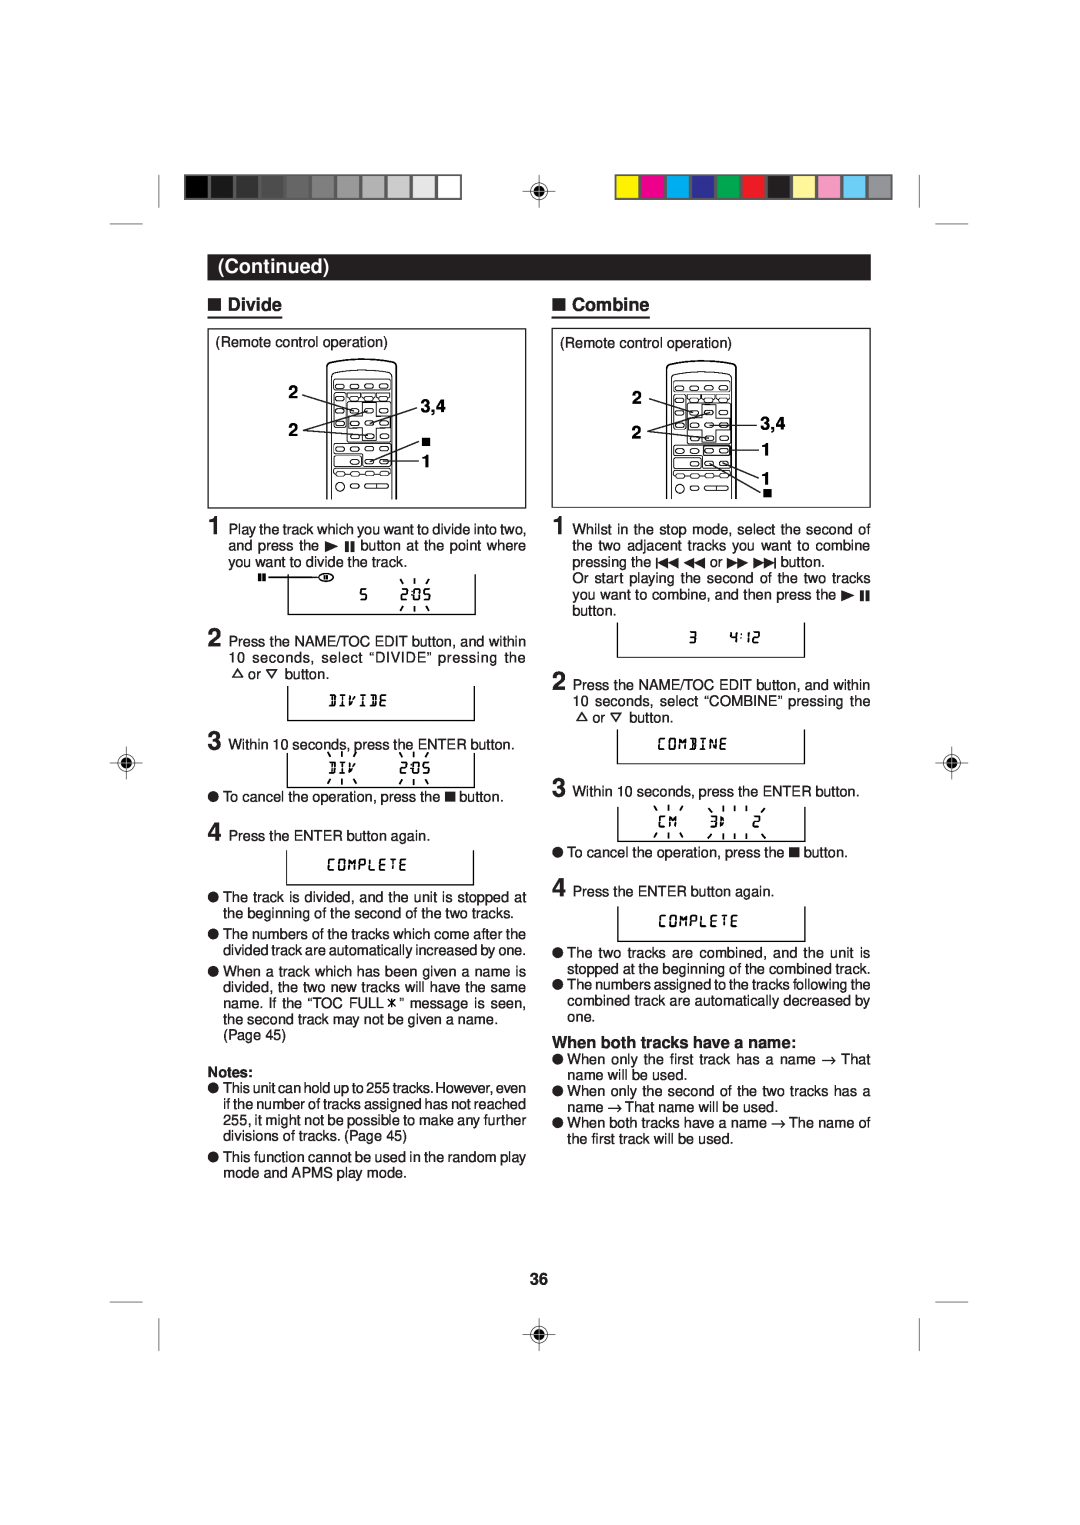 Sharp MD-M1H operation manual Divide, 2 3,4, Combine, When both tracks have a name, Continued 